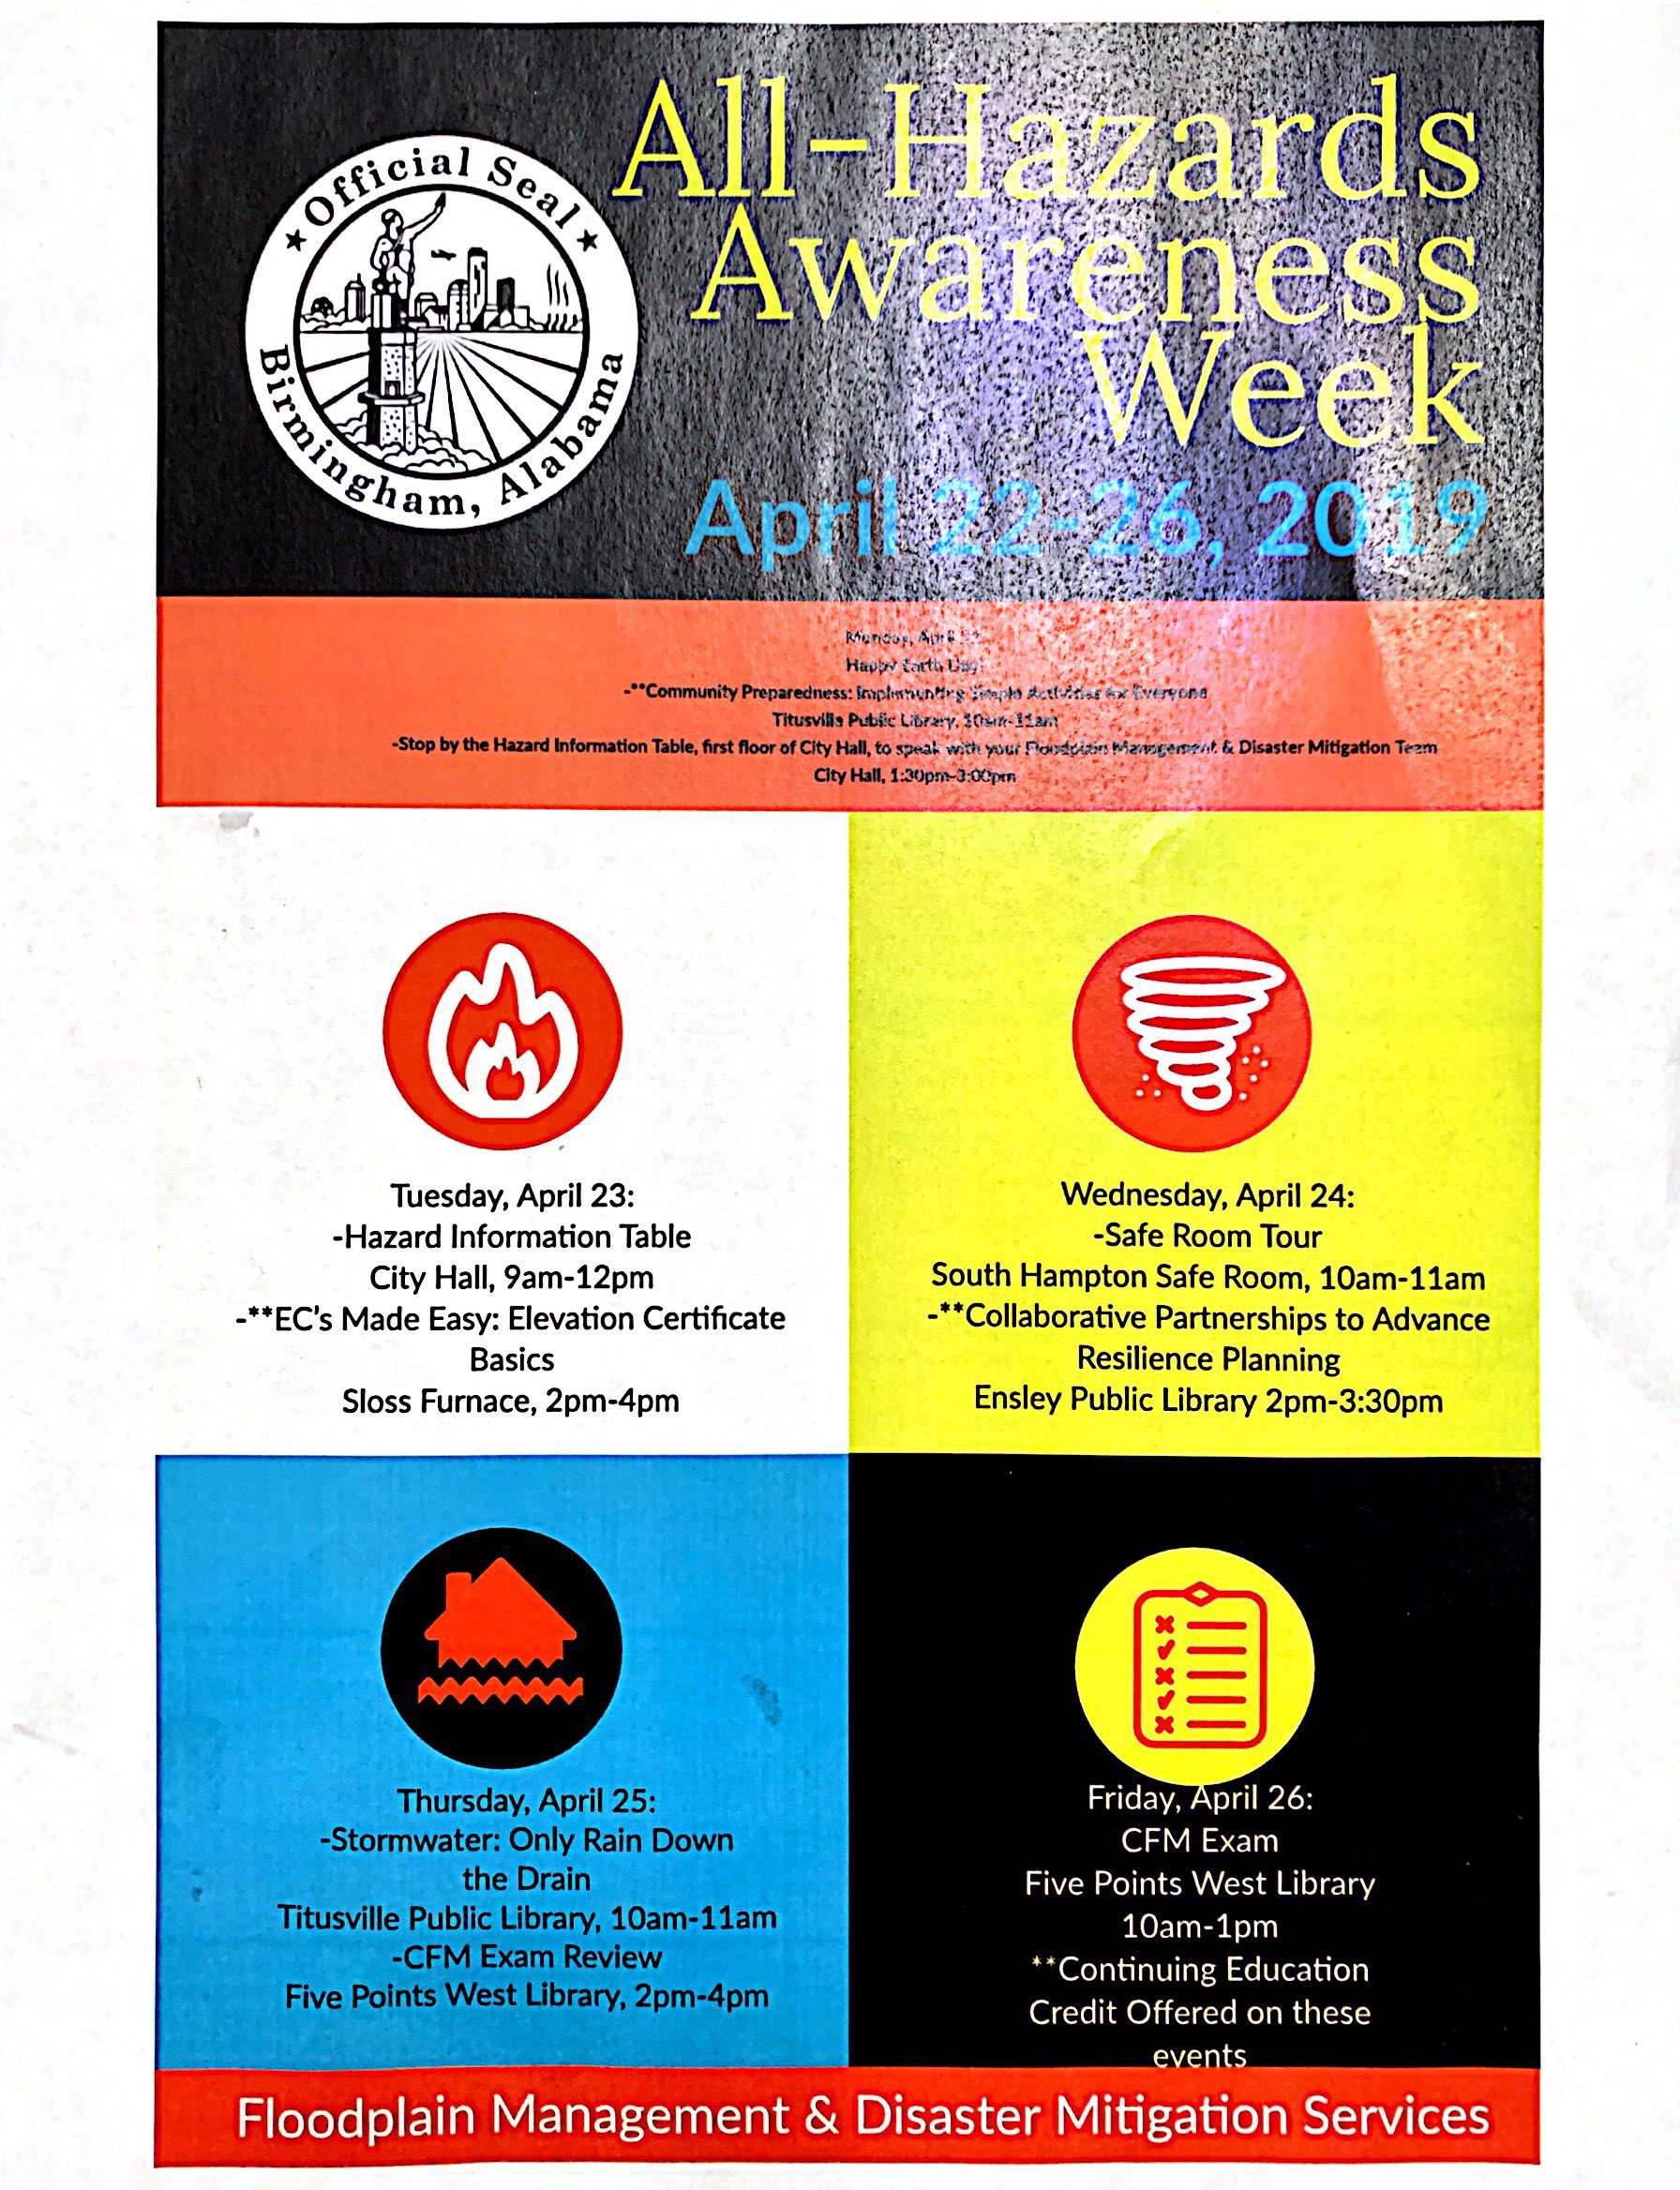 All Hazards Awareness Week The Official Website for the City of